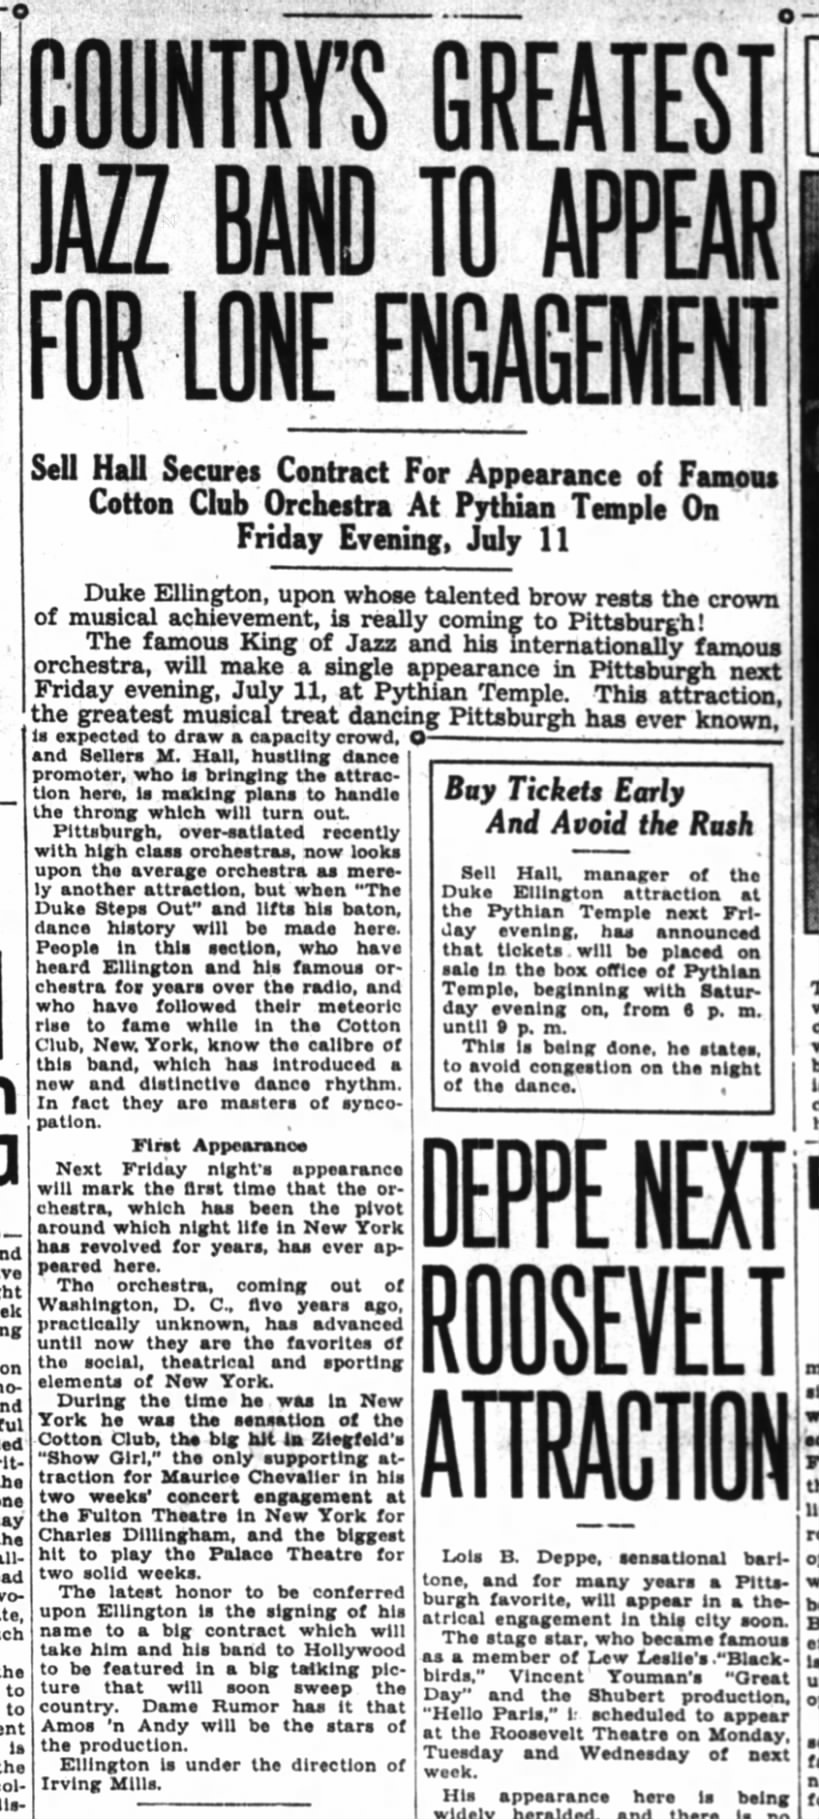 1930 announcement that Duke Ellington (the King of Jazz) and his orchestra are coming to Pittsburgh